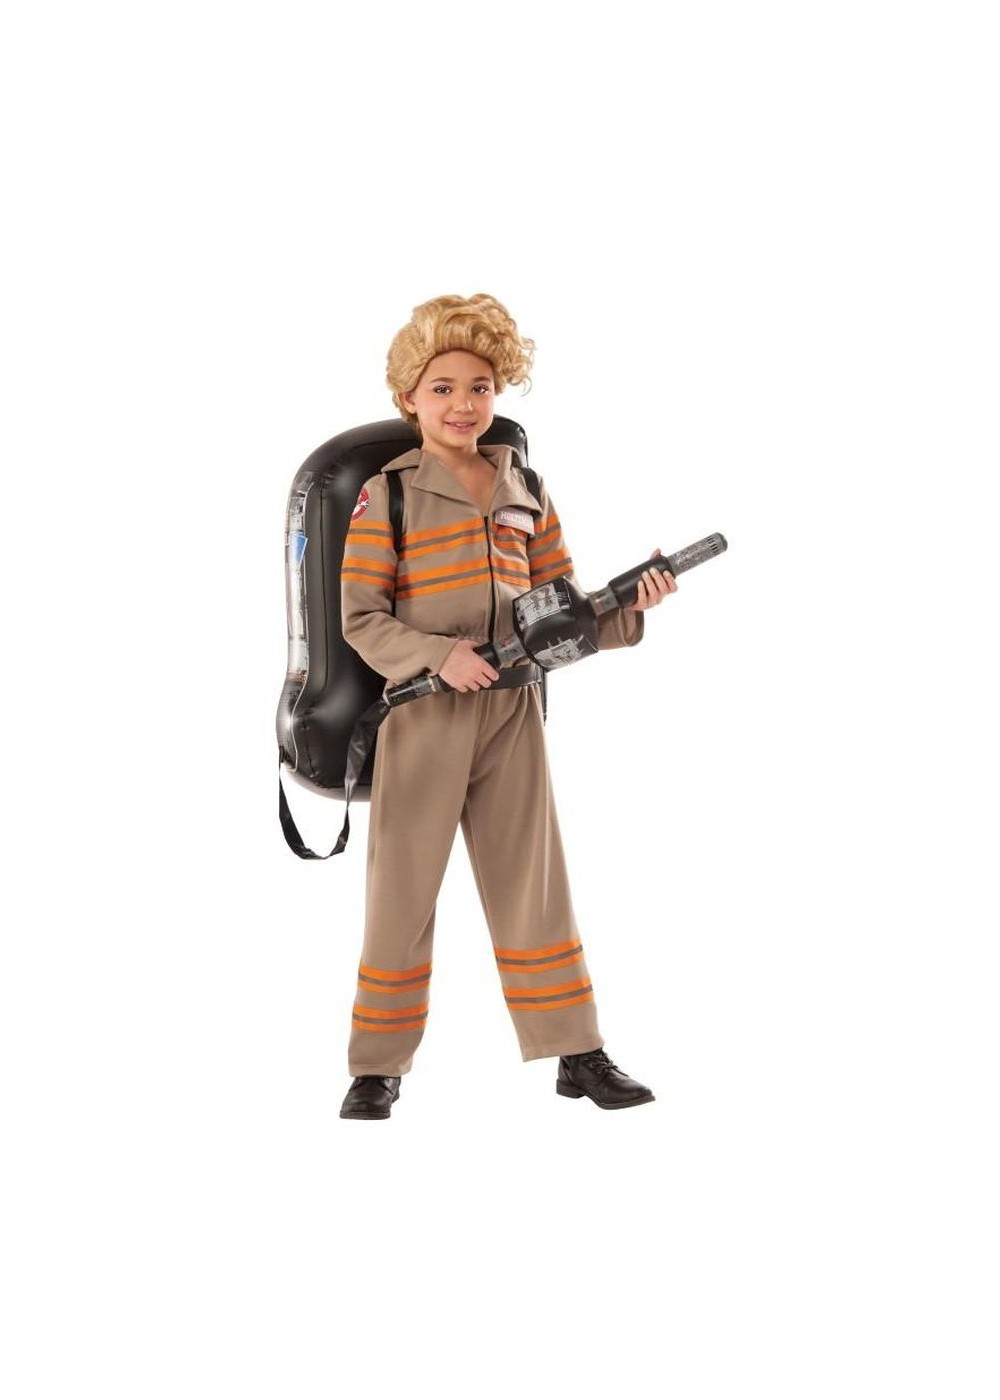 Official Ghostbusters Movie Girls Costume